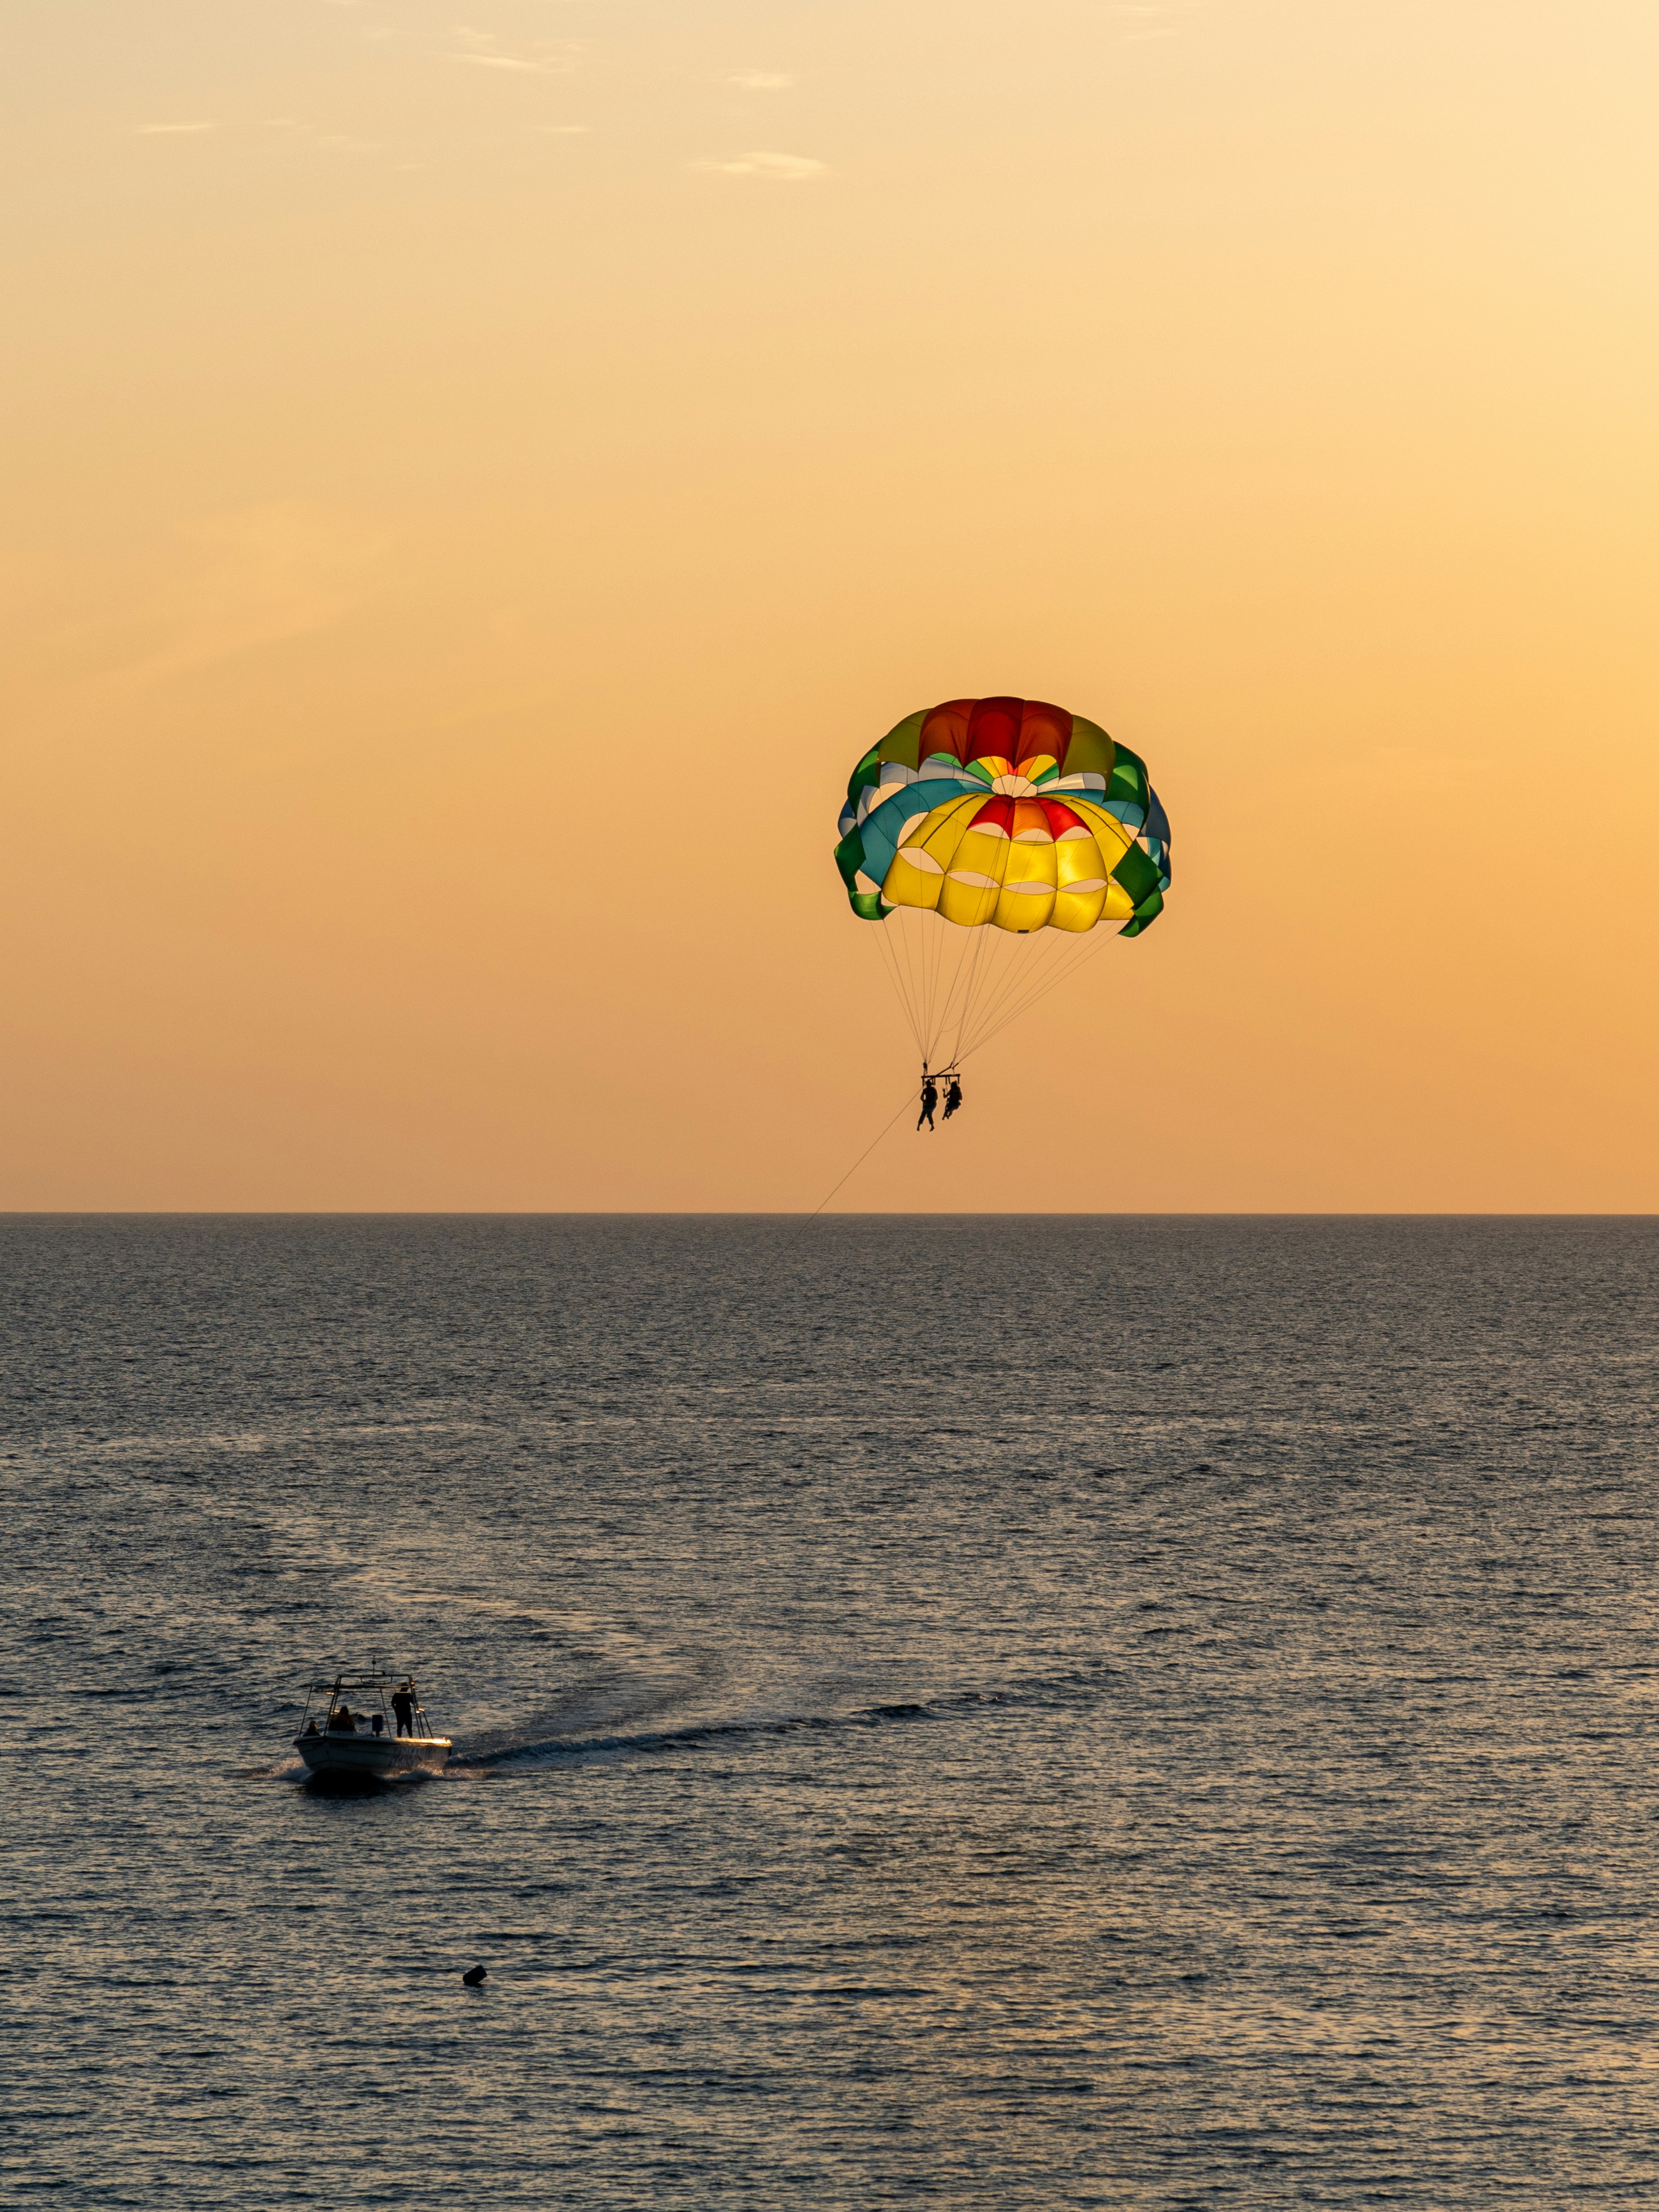 Water parachuting during the golden hour.